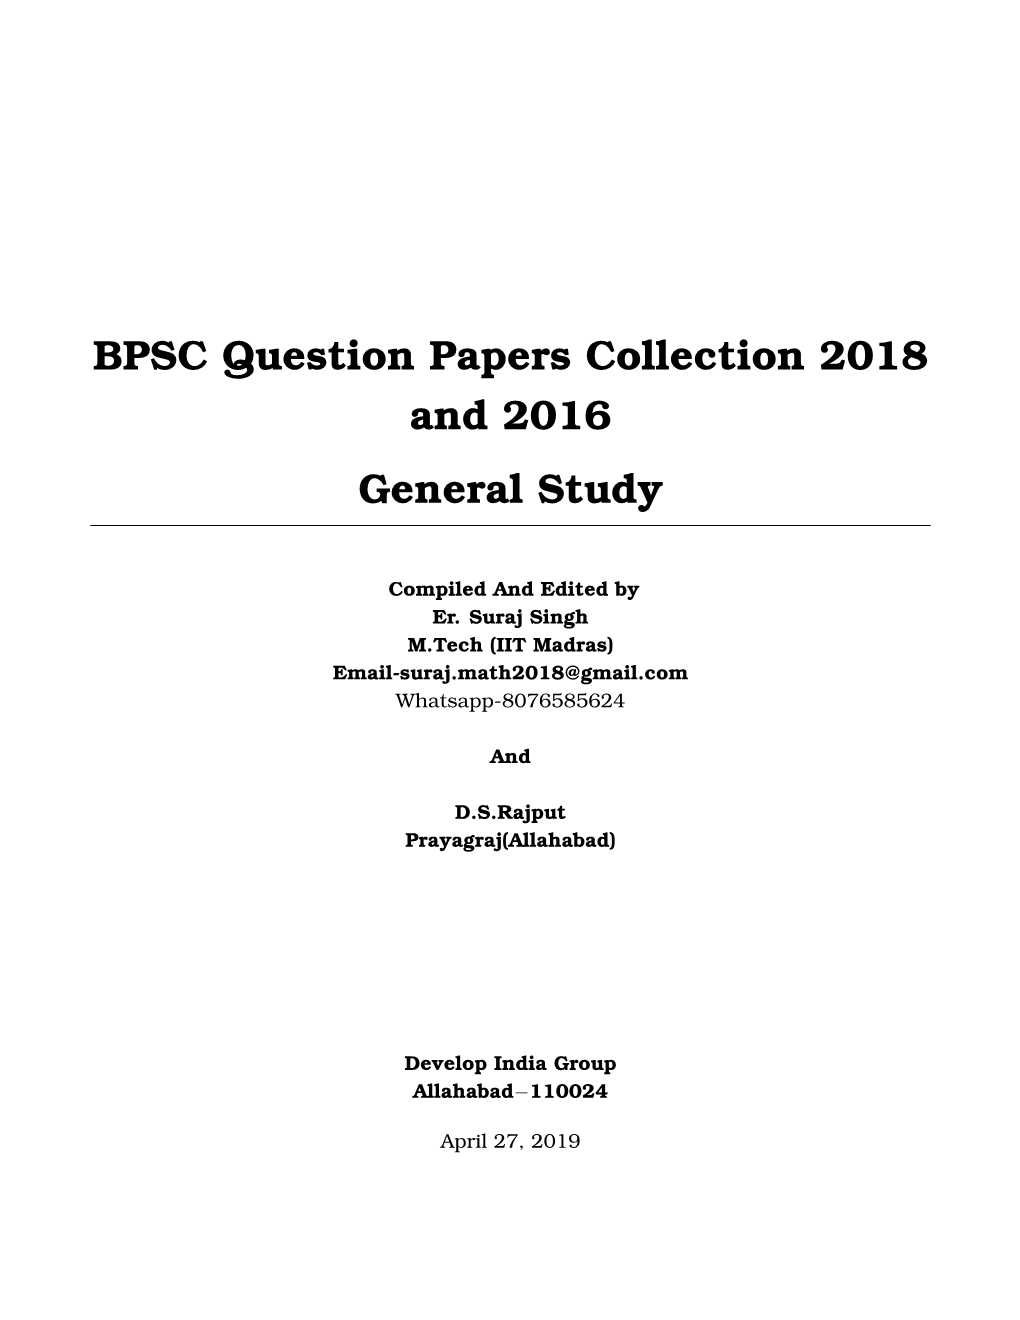 BPSC Question Papers Collection 2018 and 2016 General Study